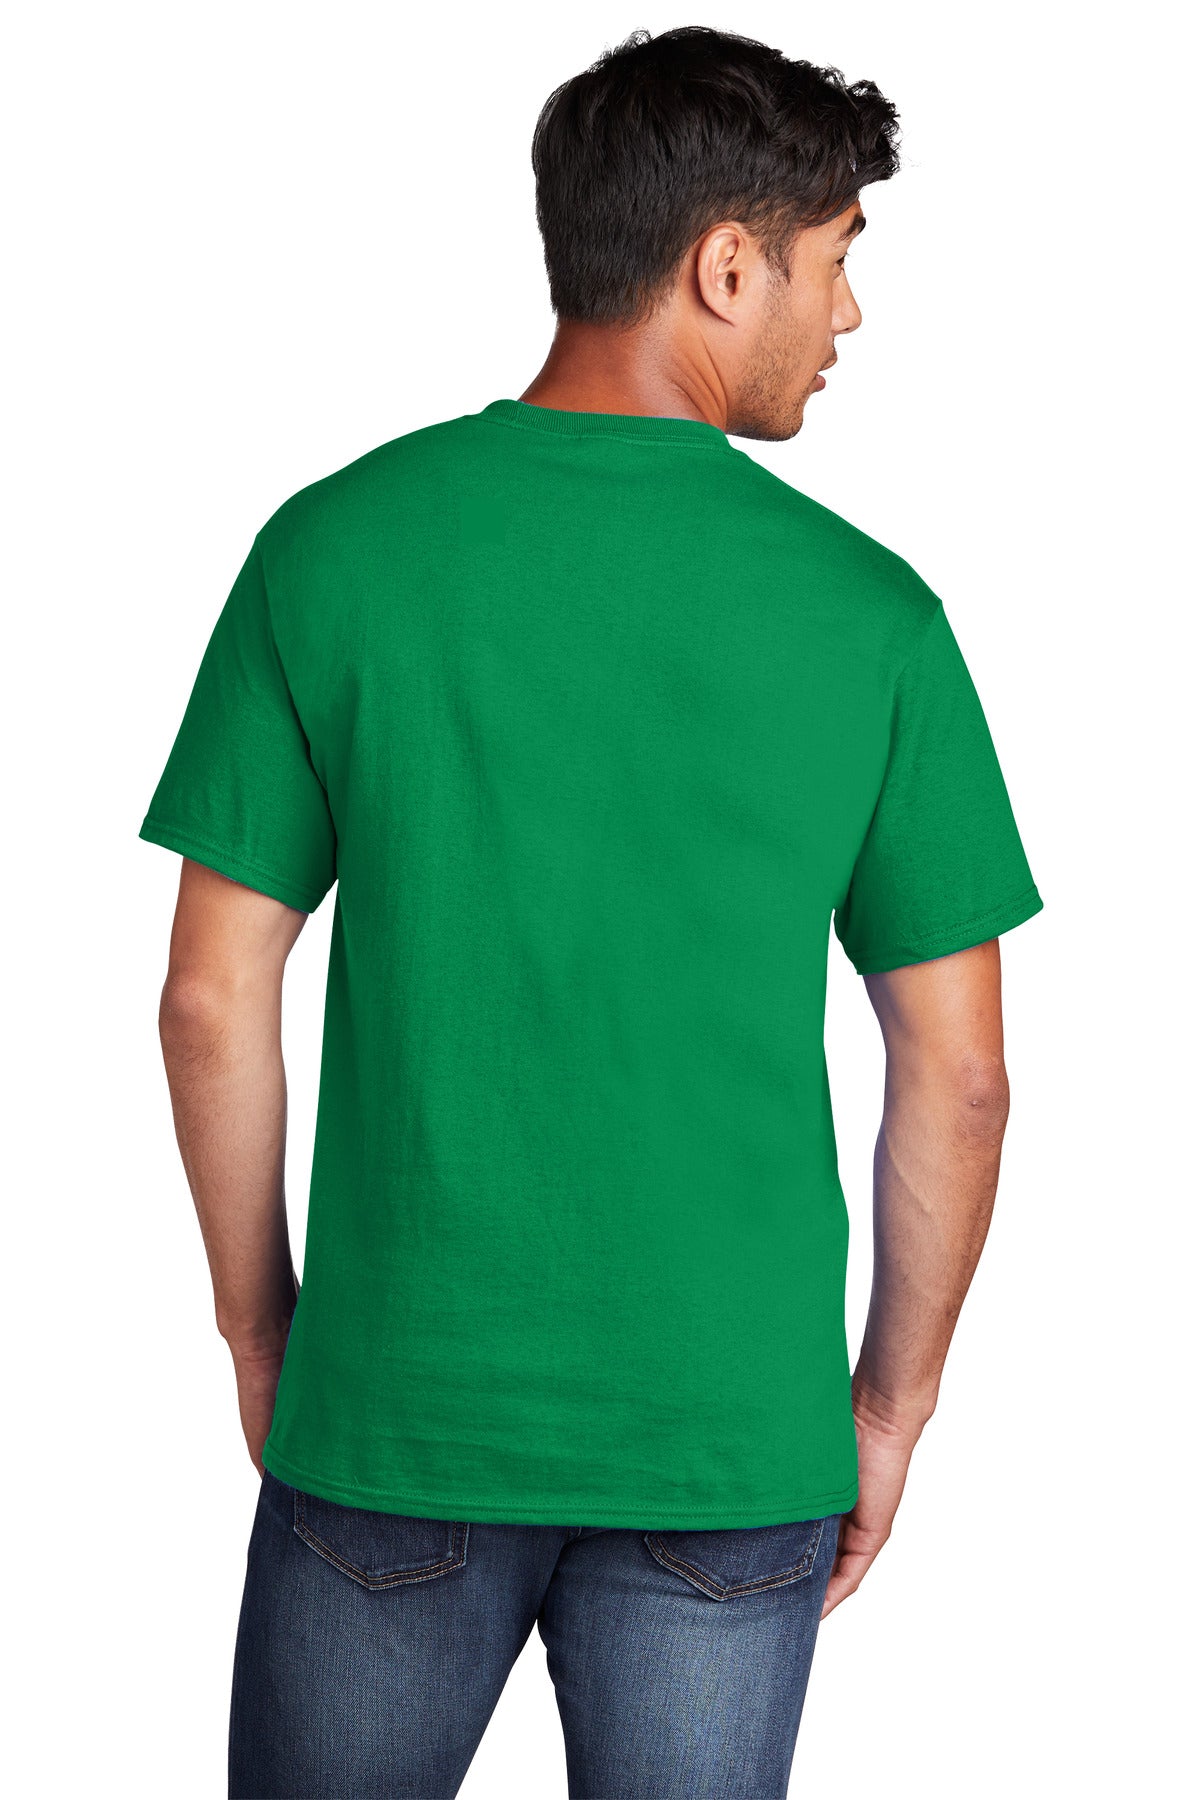 Port & Company - Core Cotton Tee. PC54 - Athletic Kelly